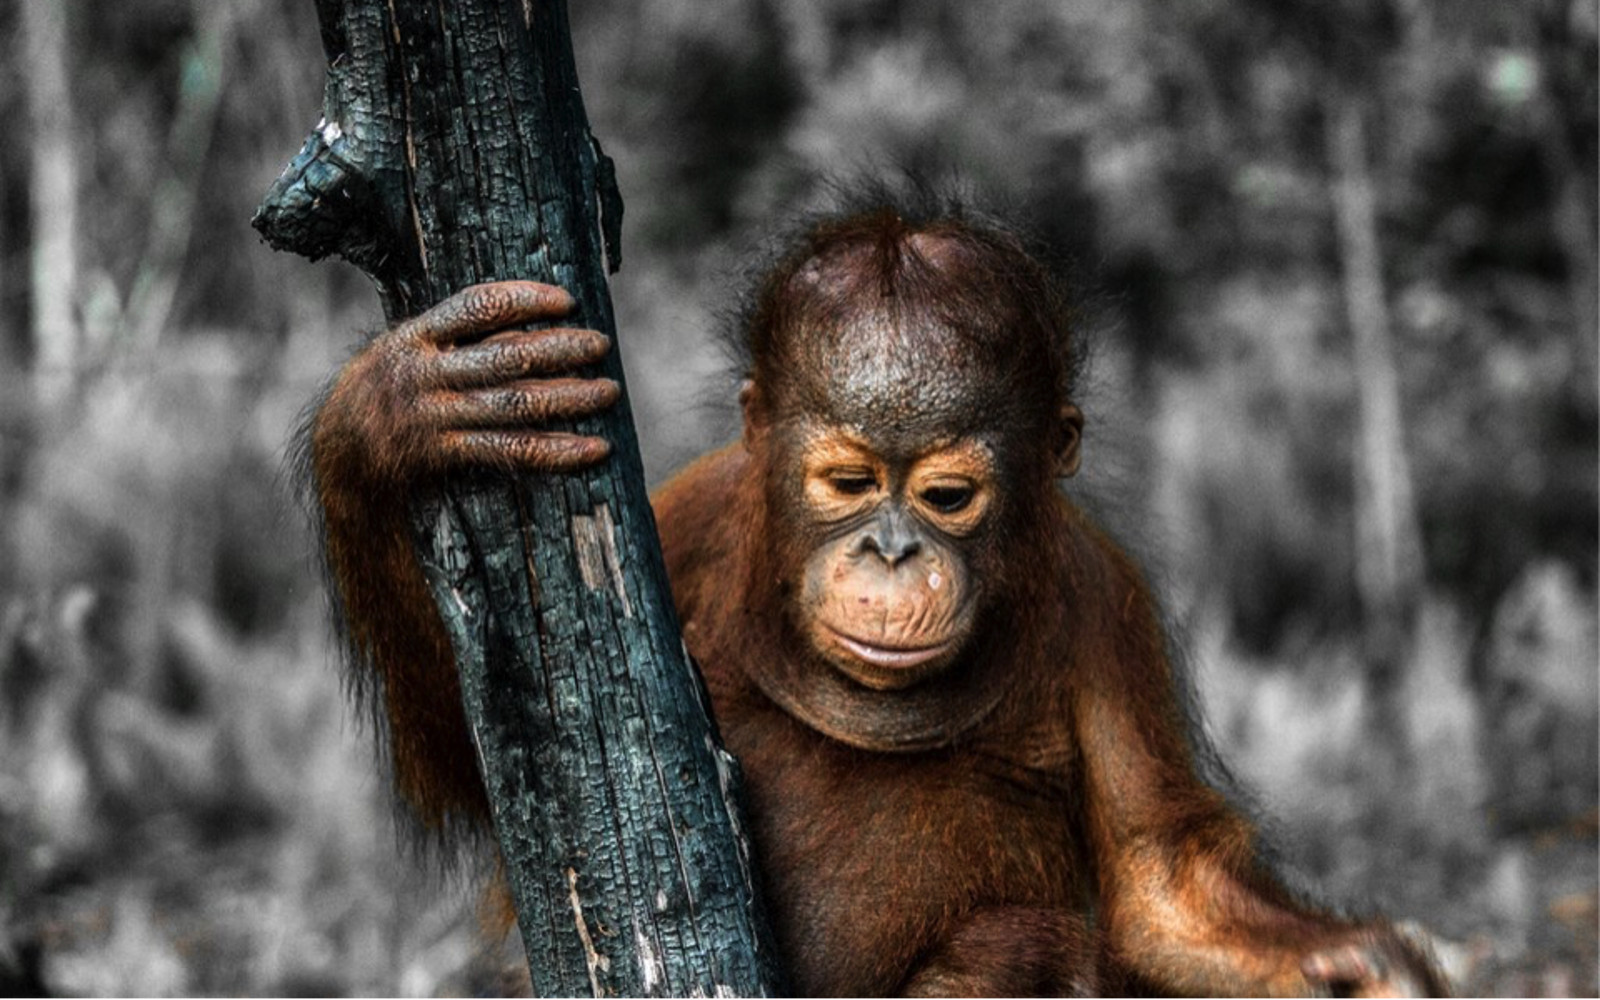 Heartbreaking Photo of Baby Orangutan in Scorched Remains of Their Home Shows Why We Need to Rethink Our Snacks